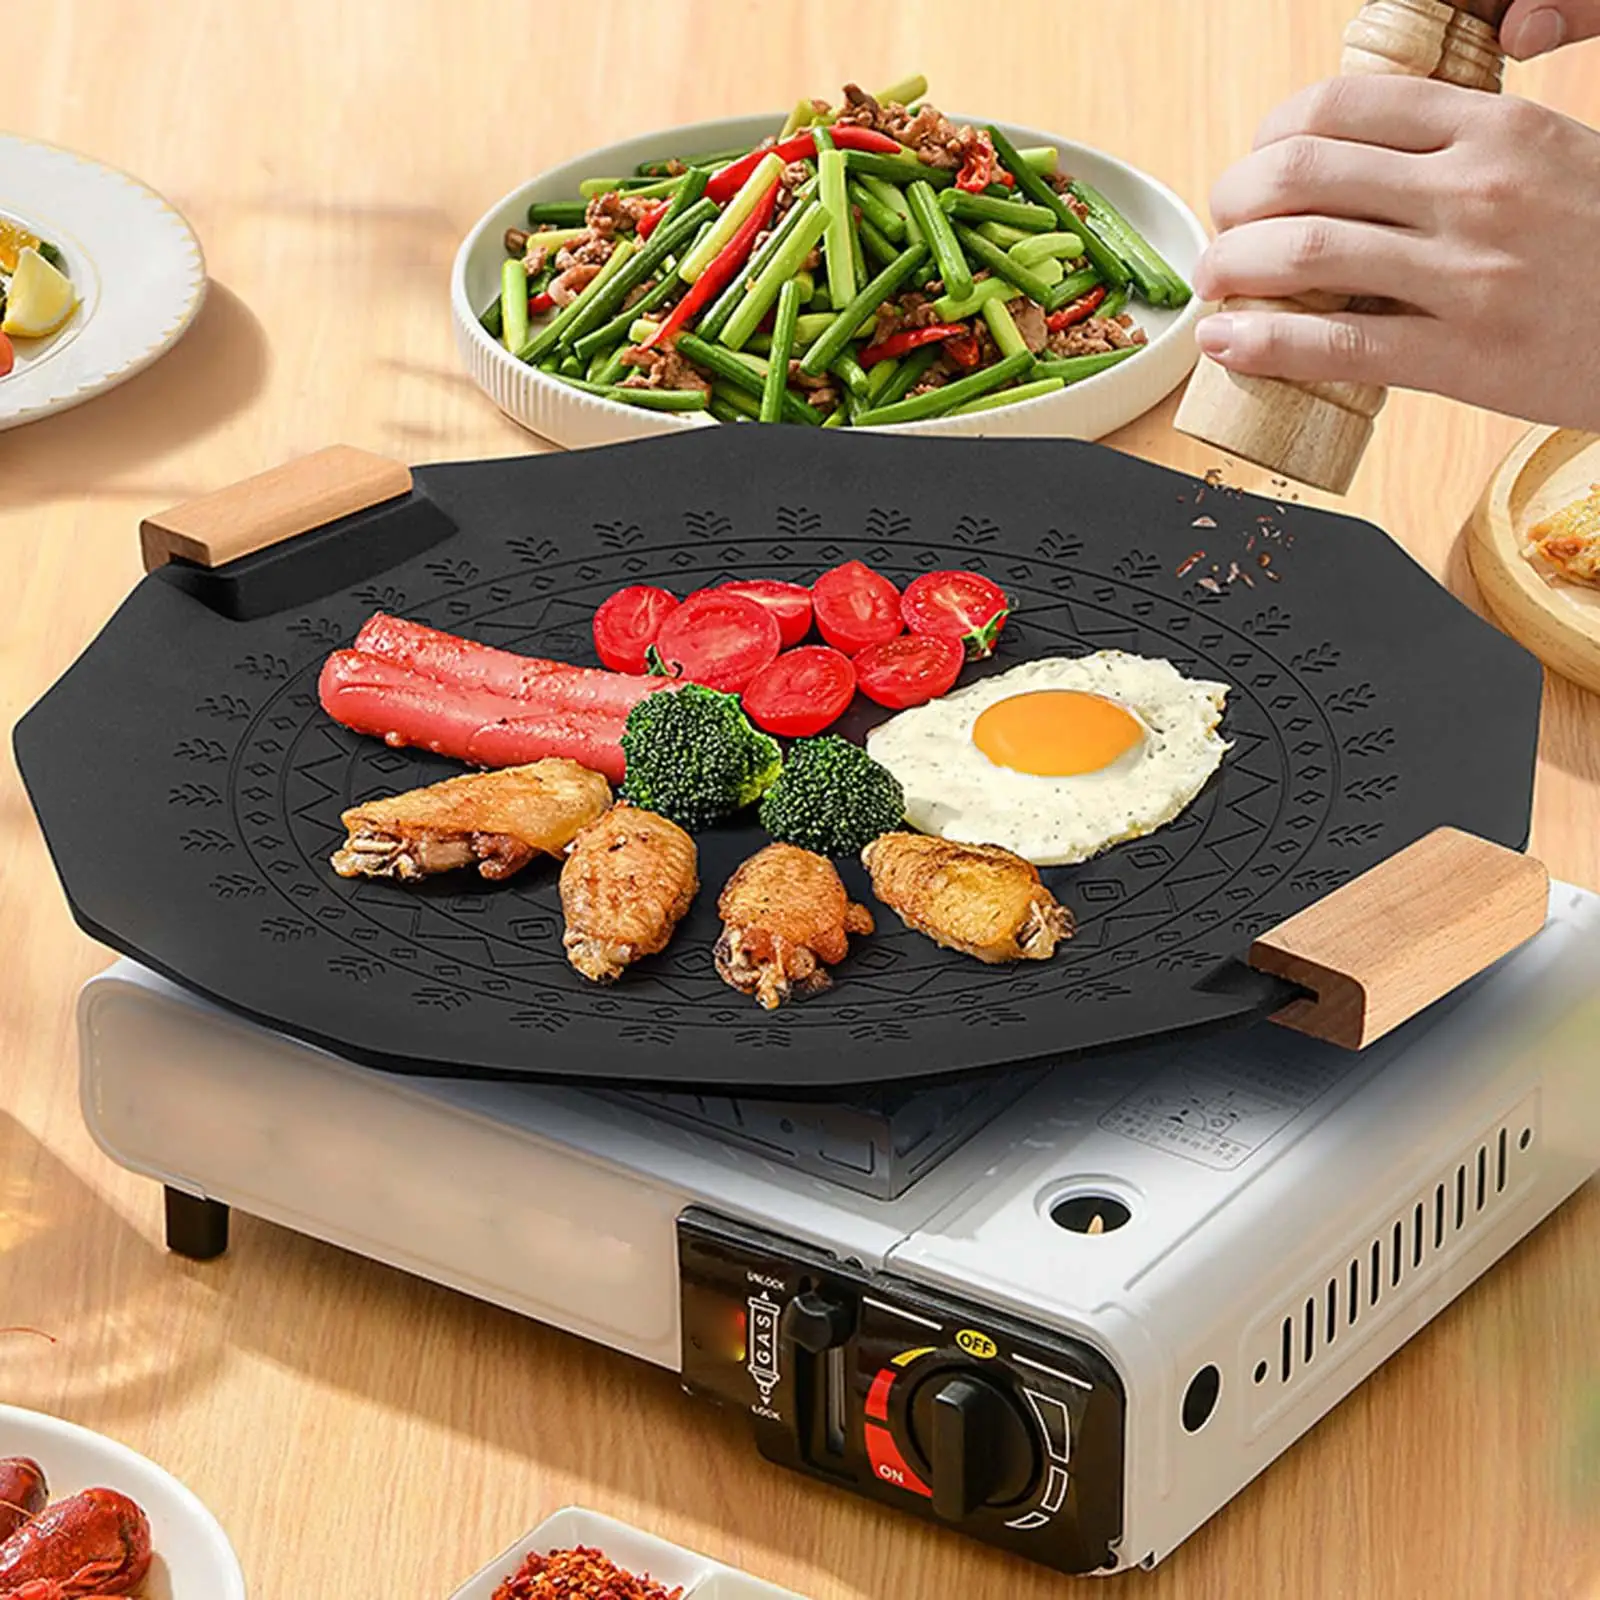 Outdoor Barbecue Frying Baking Pan 35cm Camping Grill Plate Household BBQ Grill Tray for Picnic Baking Kitchen Barbeque